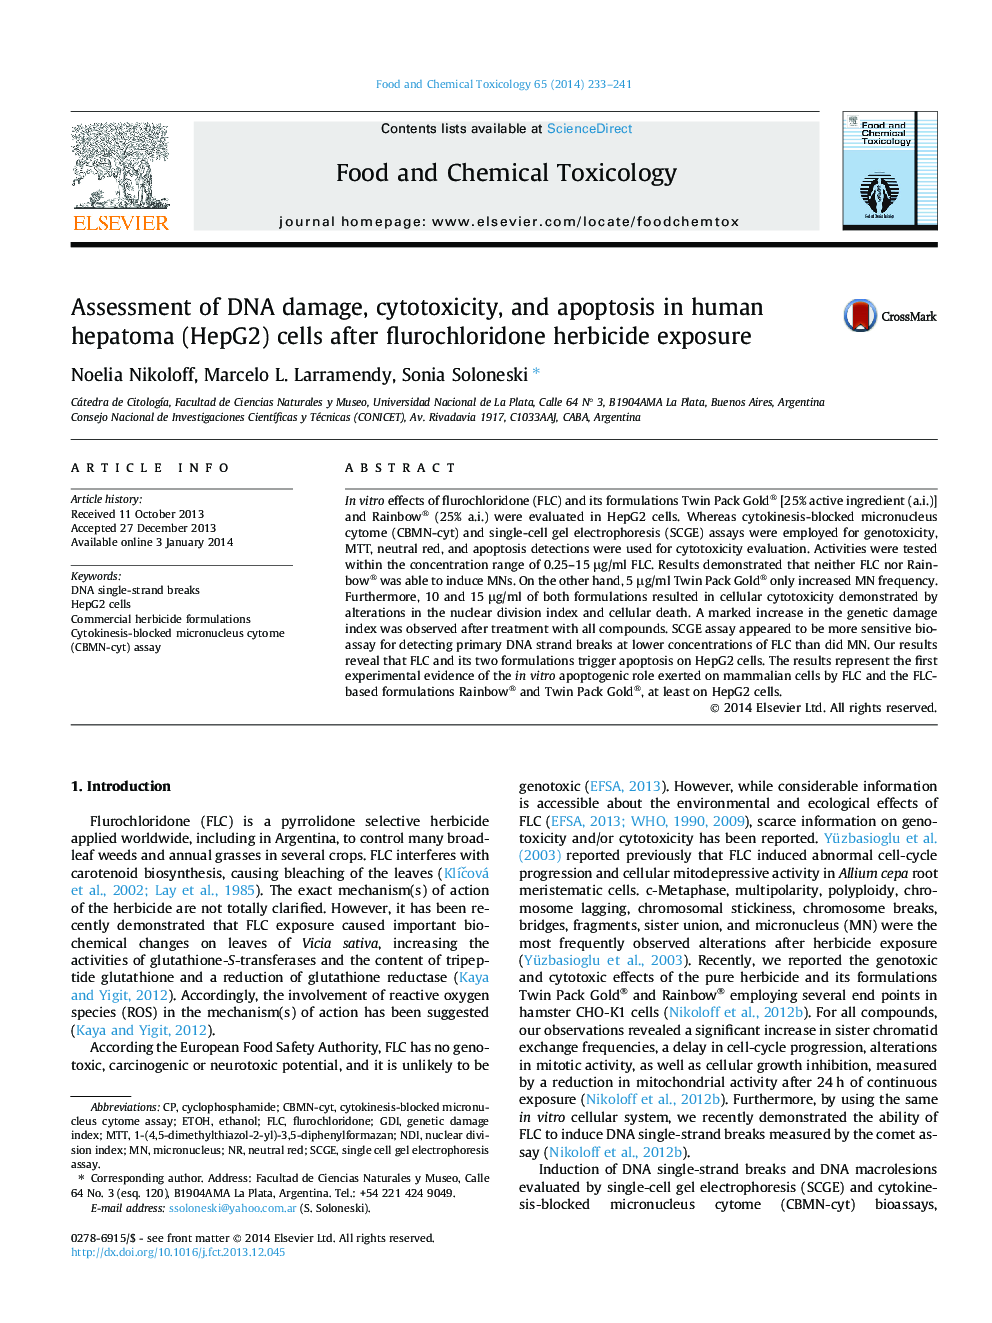 Assessment of DNA damage, cytotoxicity, and apoptosis in human hepatoma (HepG2) cells after flurochloridone herbicide exposure